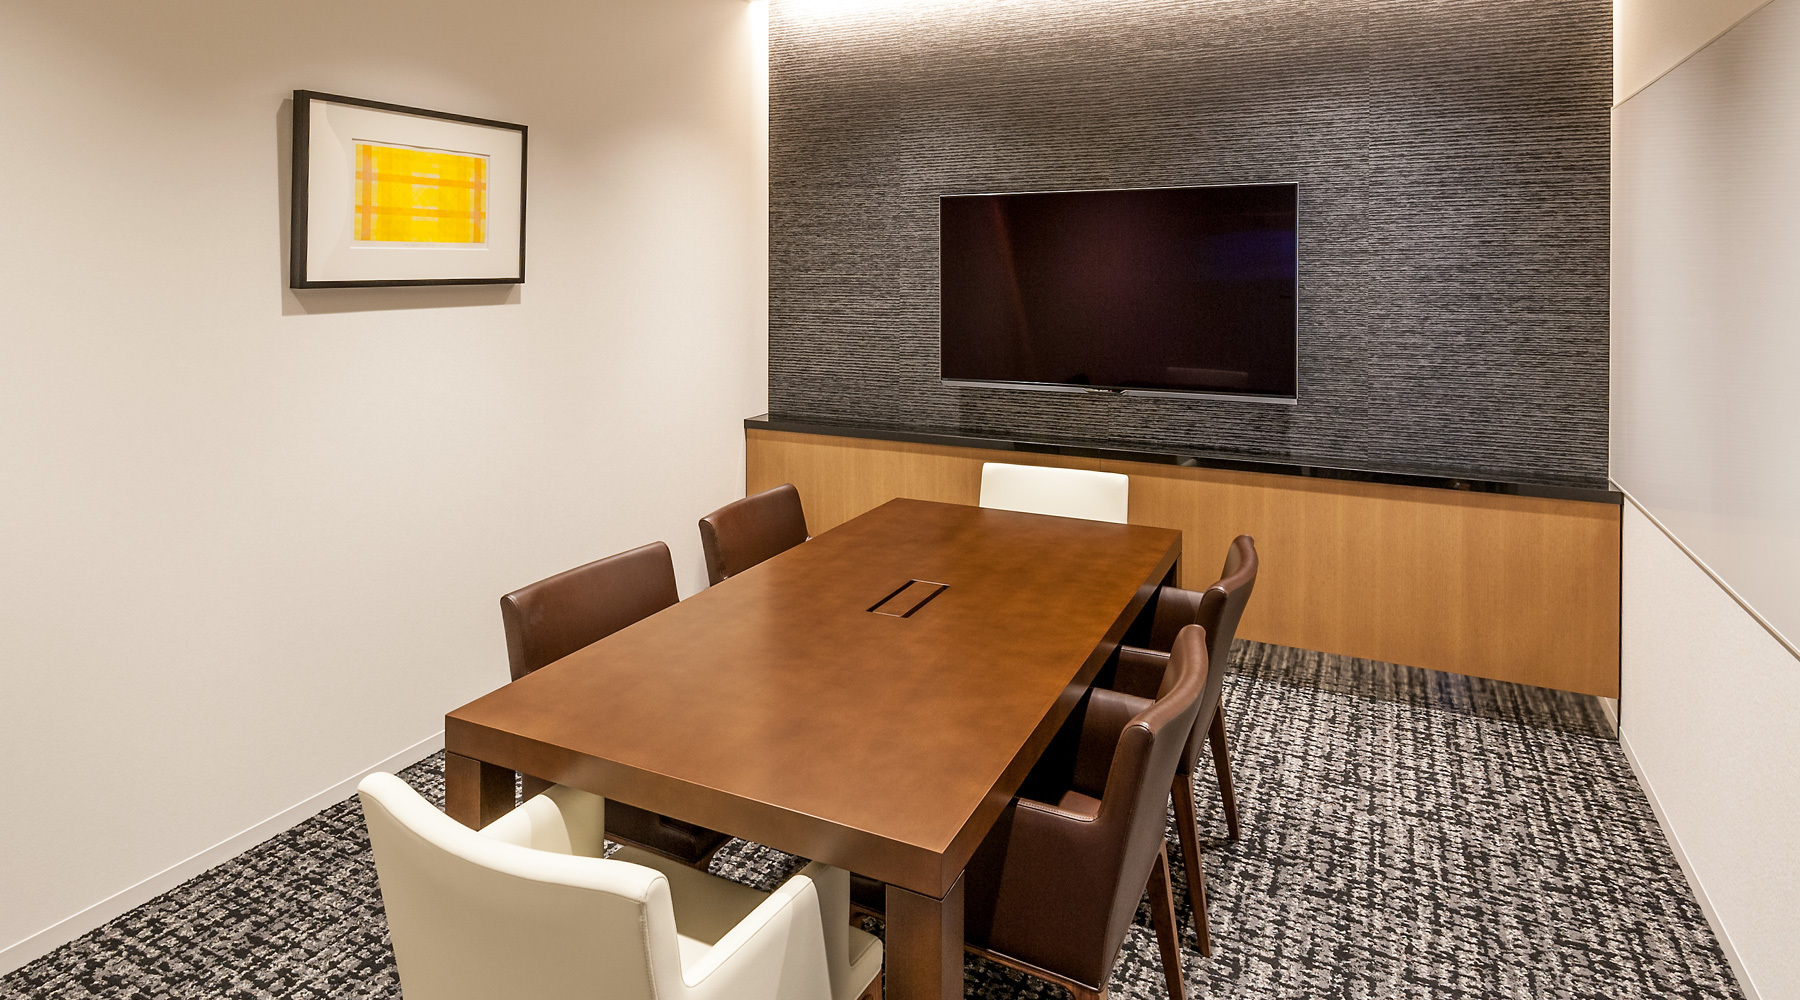 Meeting rooms are equipped with monitors and other equipment as well as whiteboards.